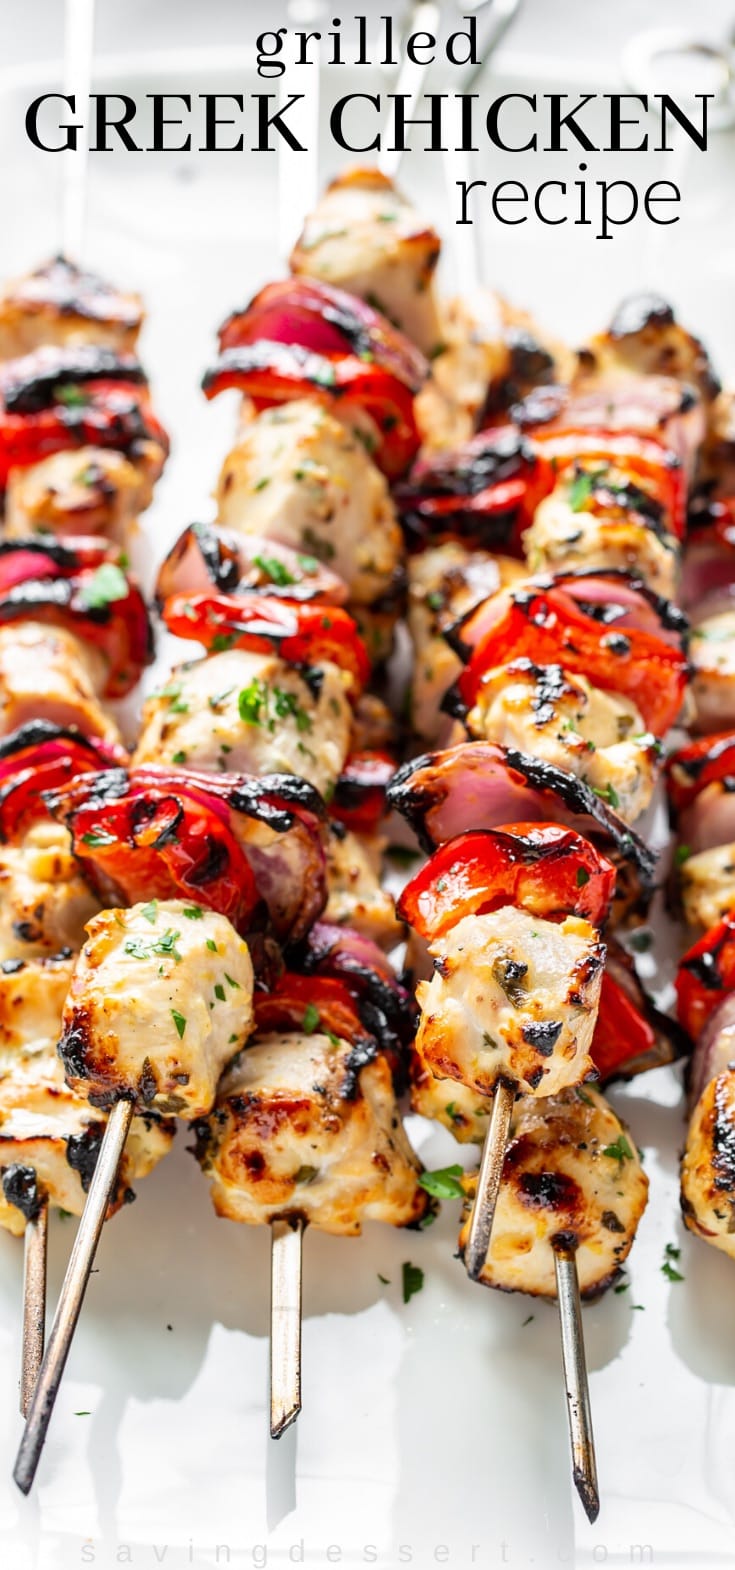 Skewers of grilled chicken with red onion and red peppers